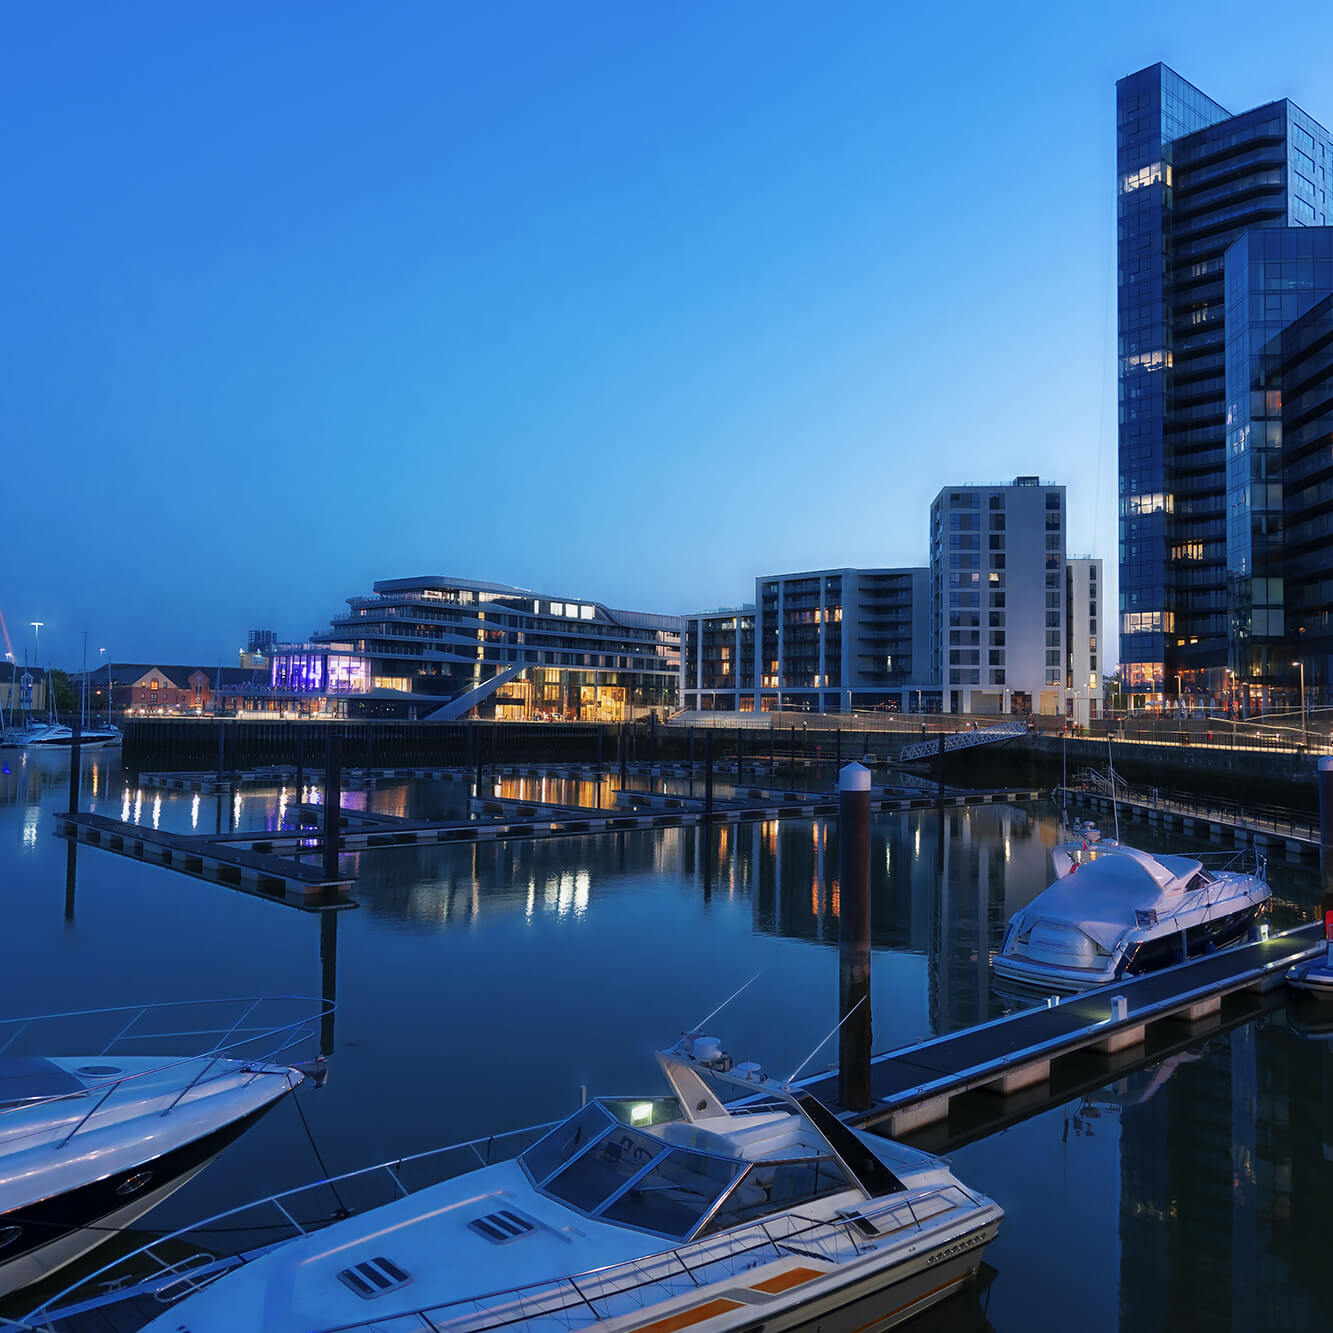 A serene twilight scene at a modern marina with sleek yachts docked along the water, surrounded by contemporary buildings under a clear blue sky.